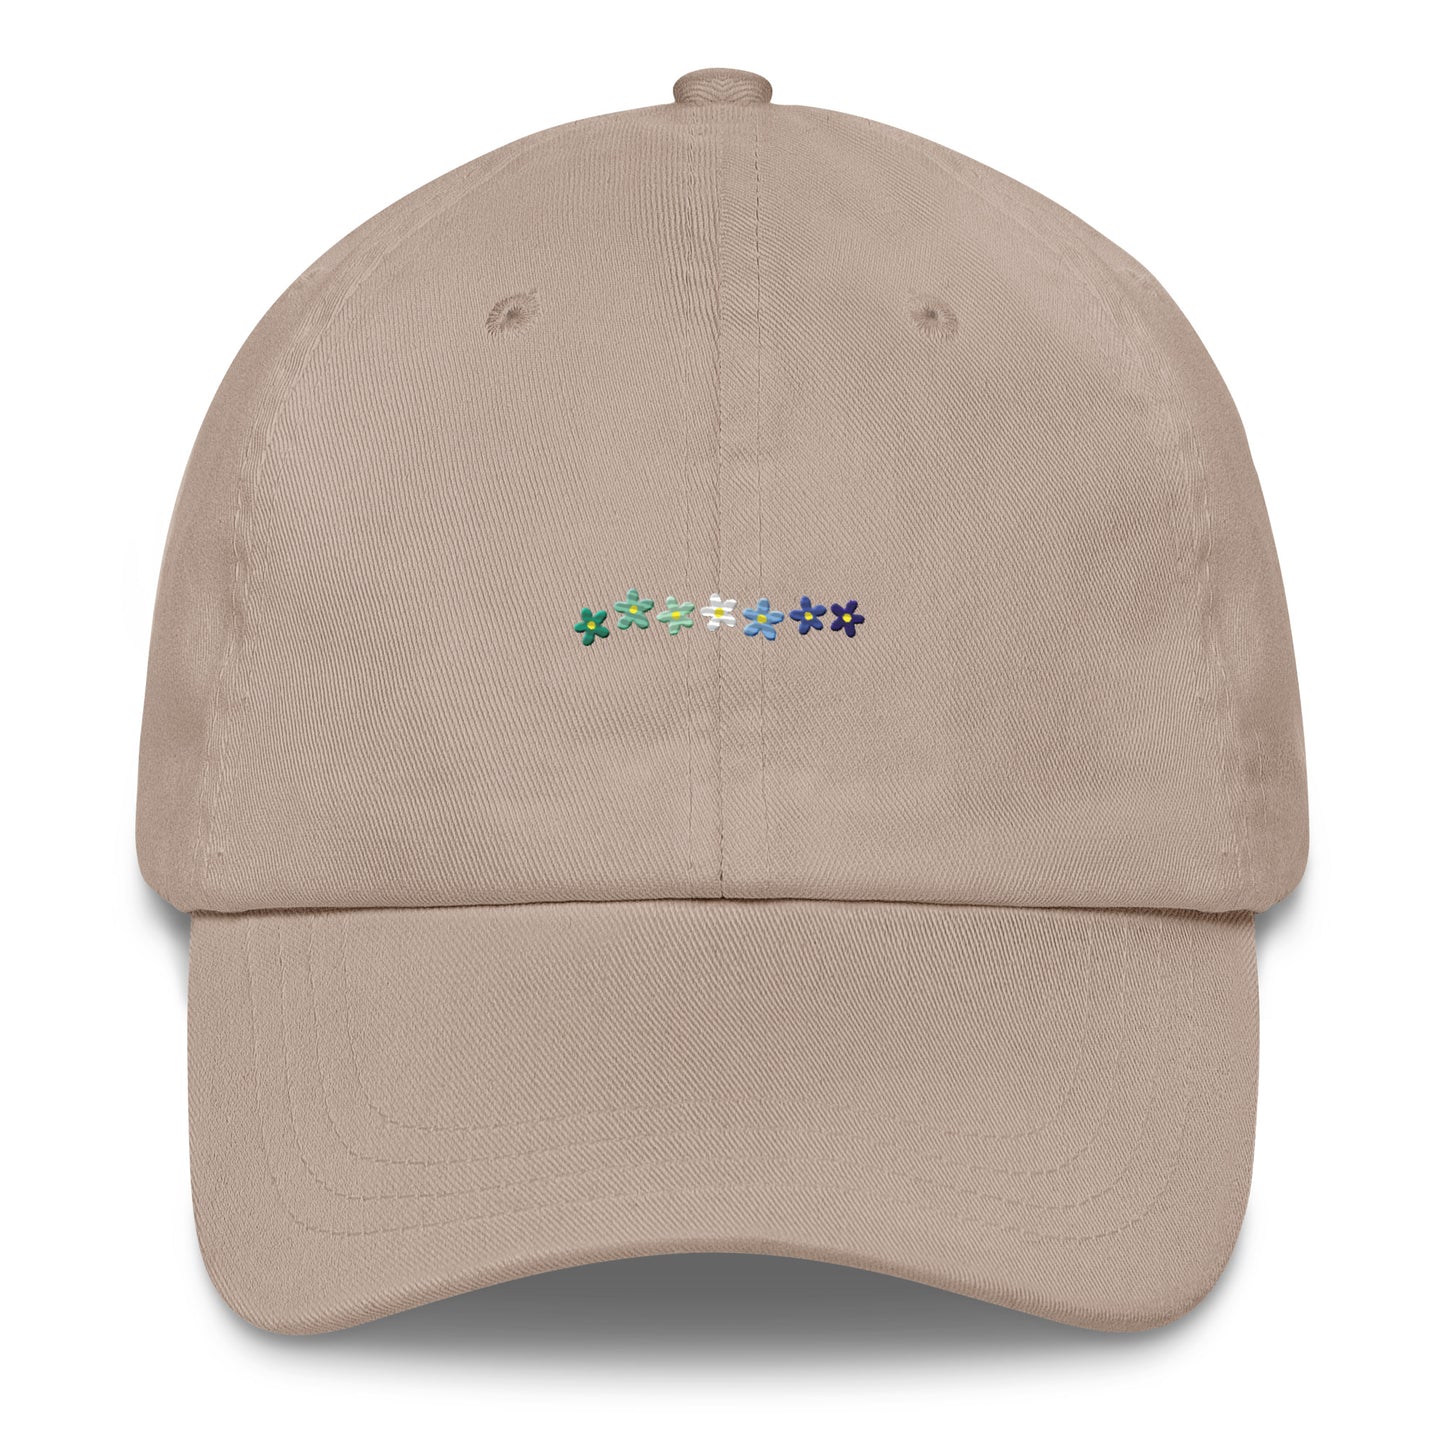 the MLM Hat